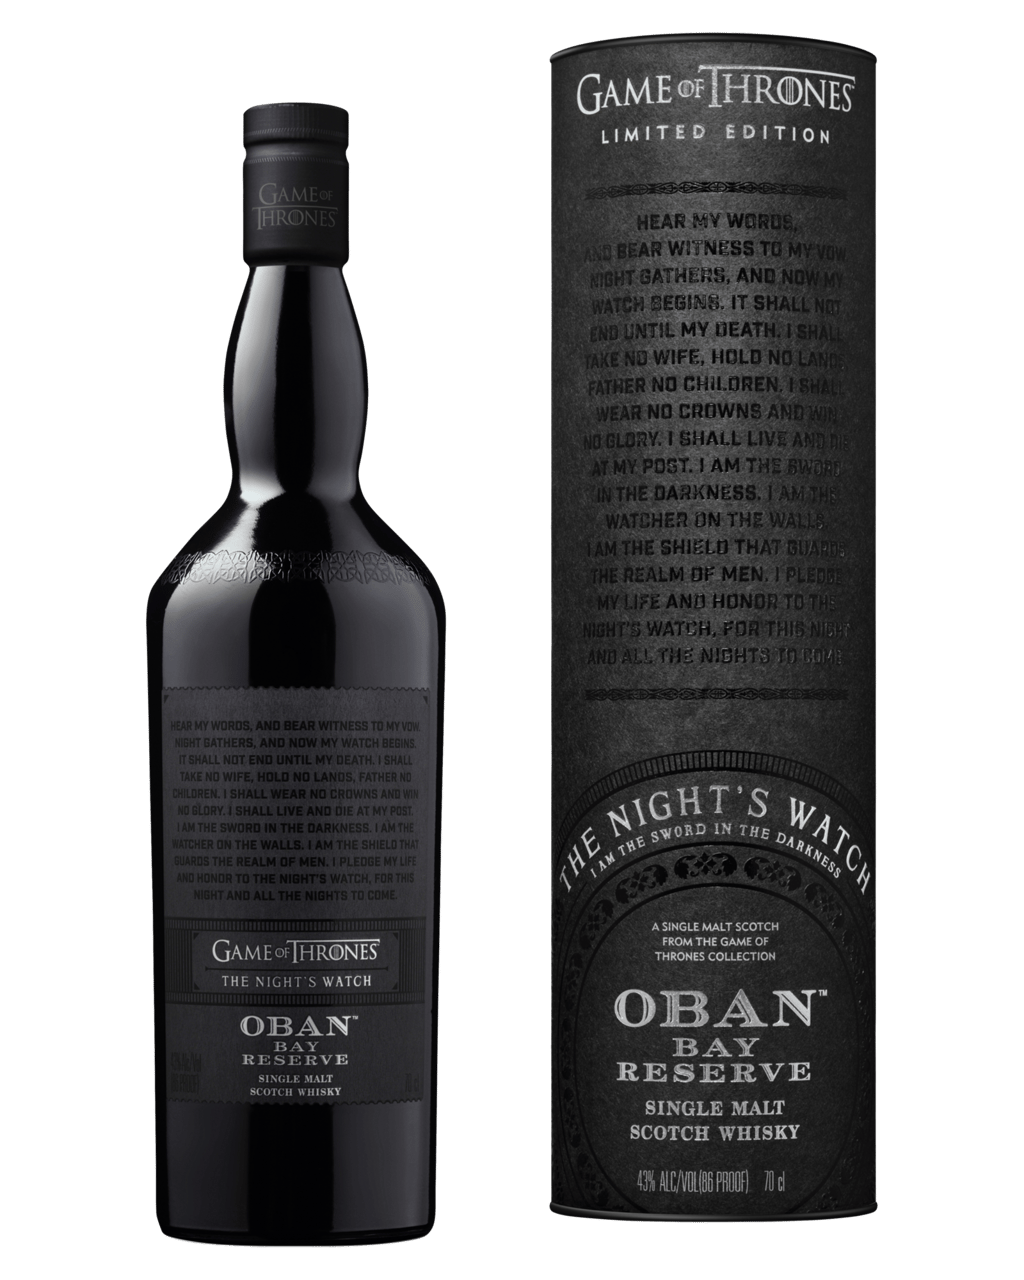 Buy Oban Bay Reserve Game Of Thrones The Night S Watch Single Malt Whisky 700ml Online Lowest Prices In Australia Dan Murphy S